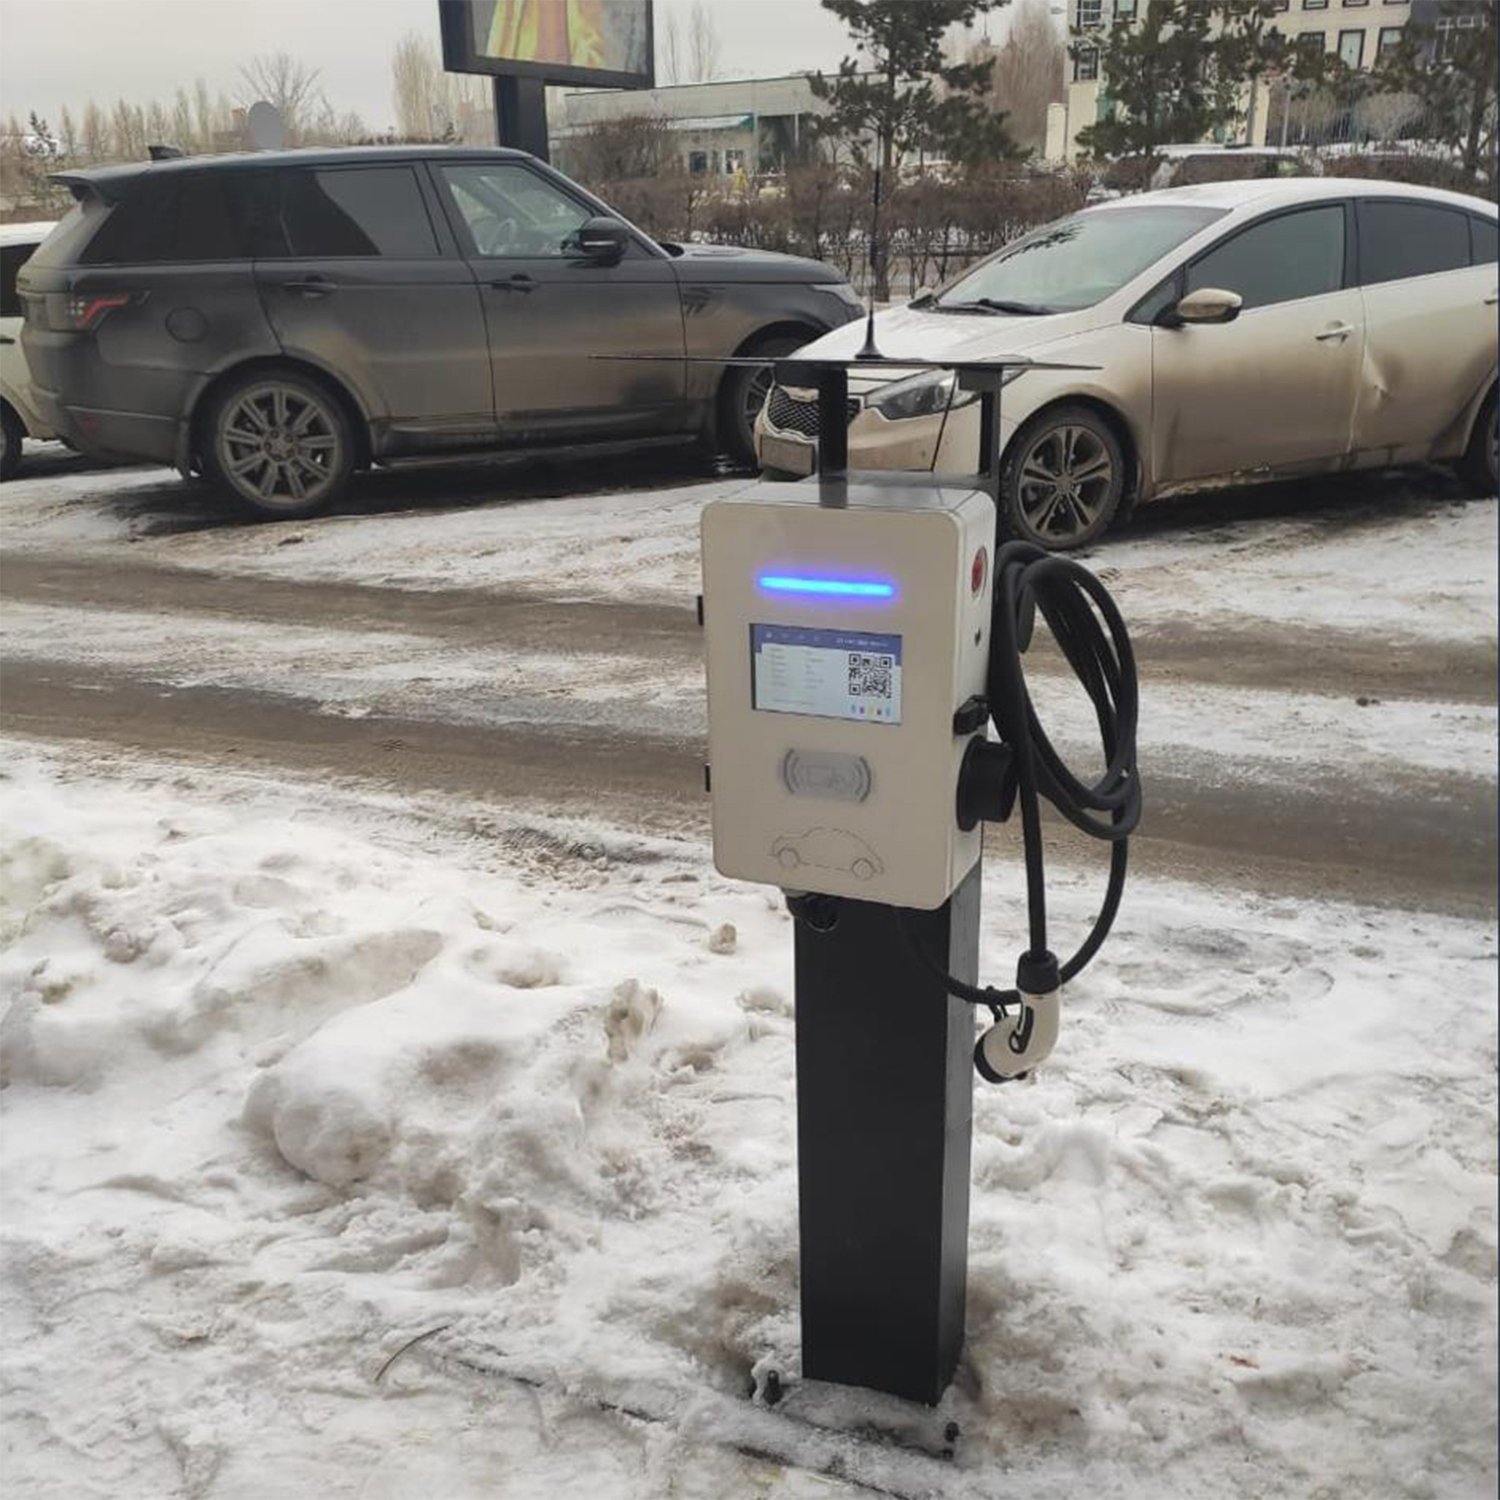 EV Charger has ushered in a new era and has become the new favorite of electric vehicle owners